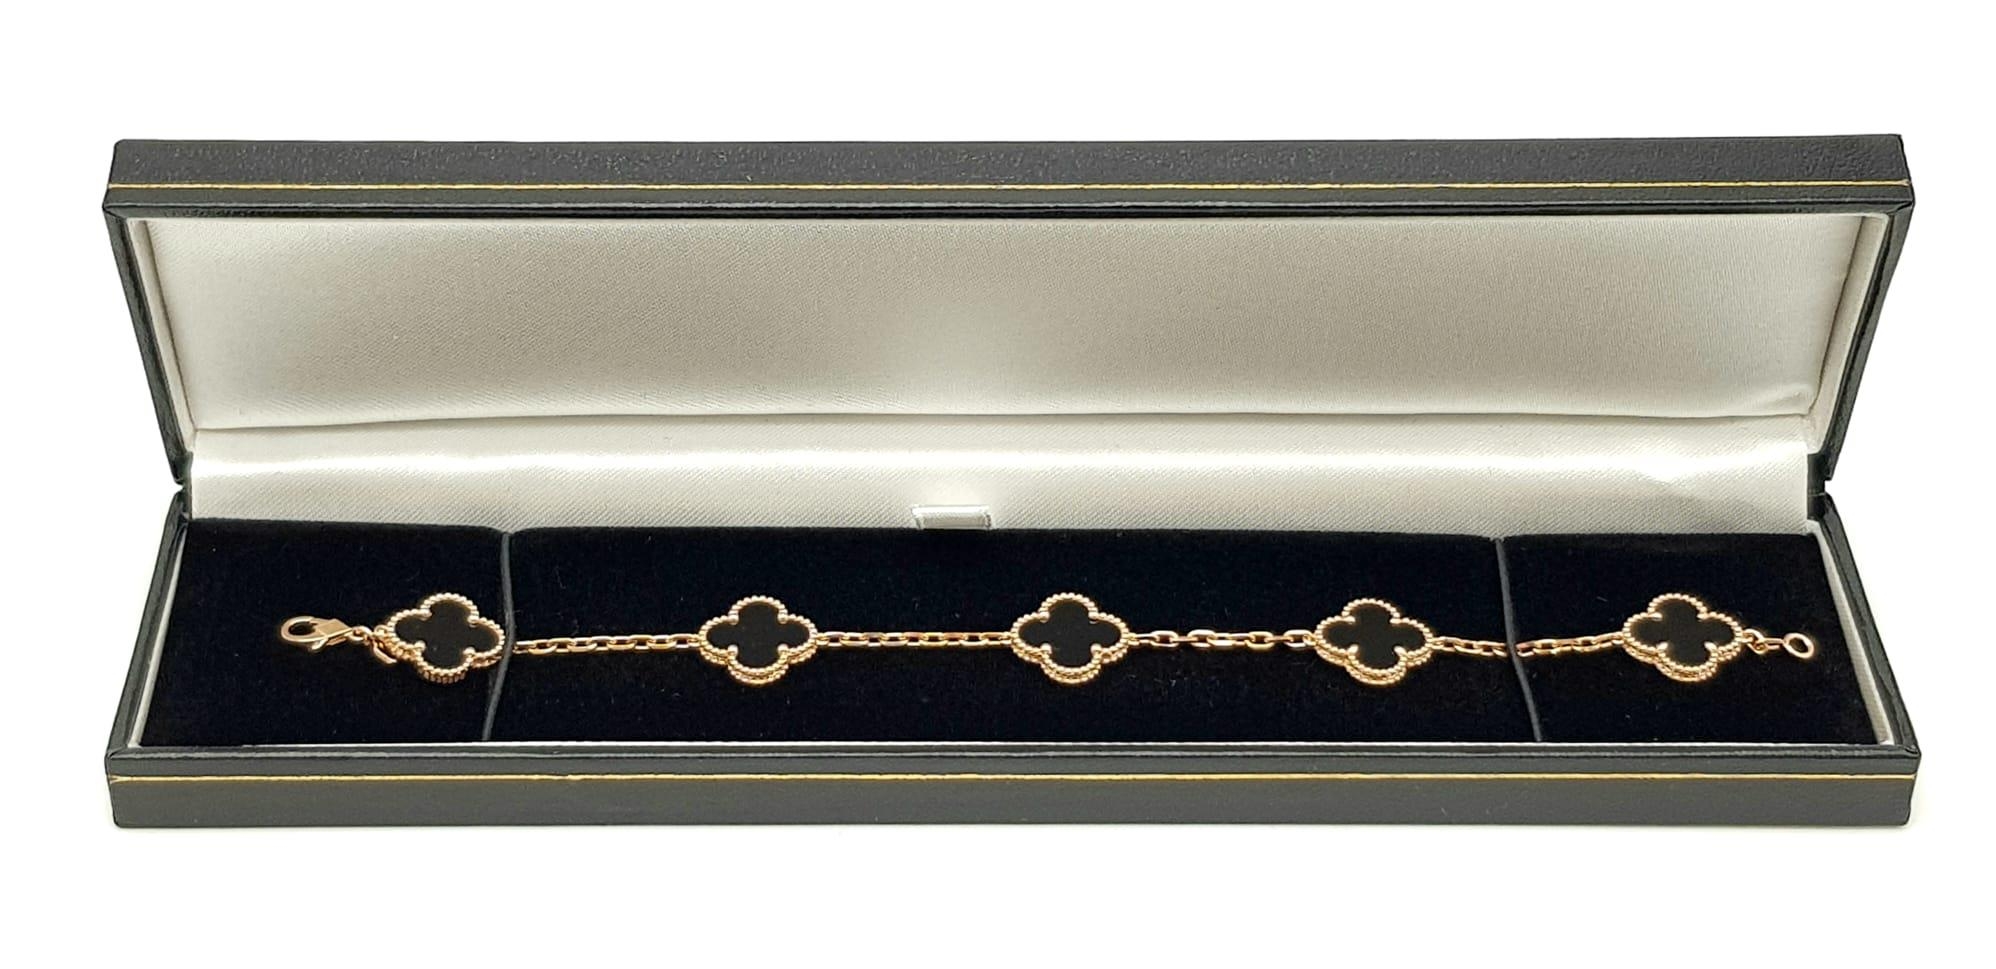 A Van Cleef and Arpels Alhambra bracelet with 5 motifs - 18ct rose gold with black onyx inserts. - Image 4 of 6